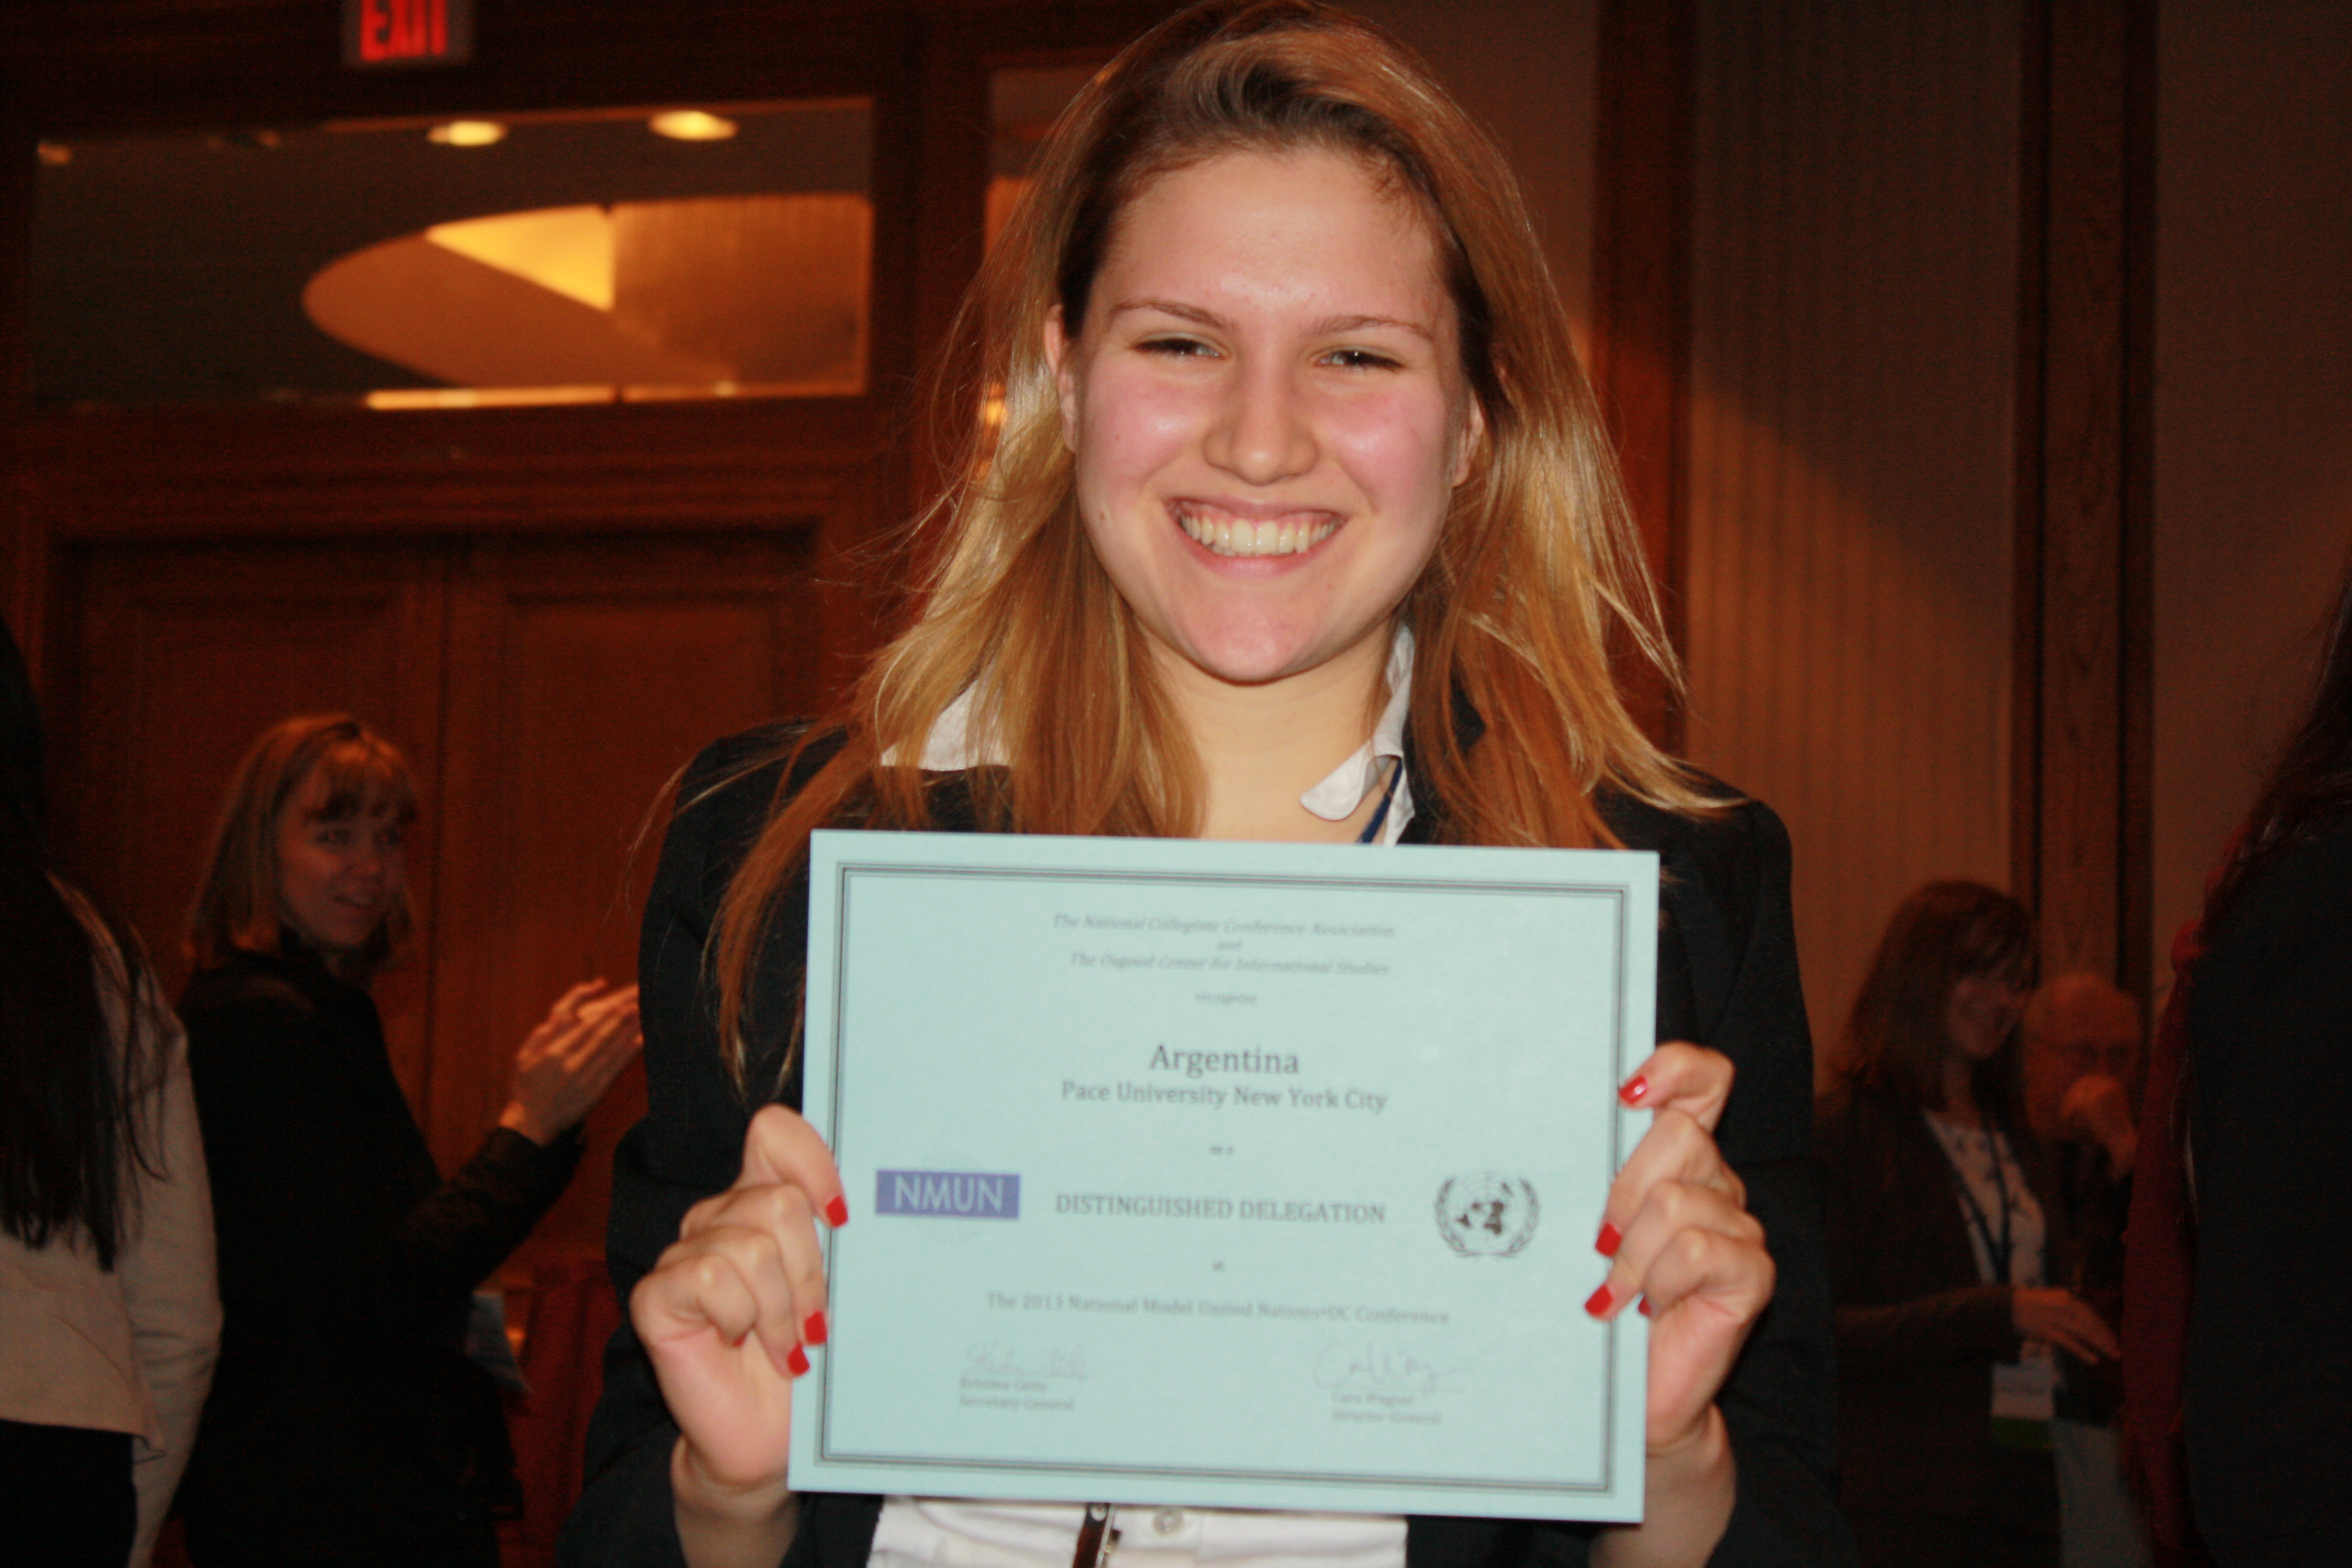 Katie James '14, Pace University New York City Model UN head delegate, shows of the award received by the students representing ?? at the 2013 National Model UN conference in Washington DC.